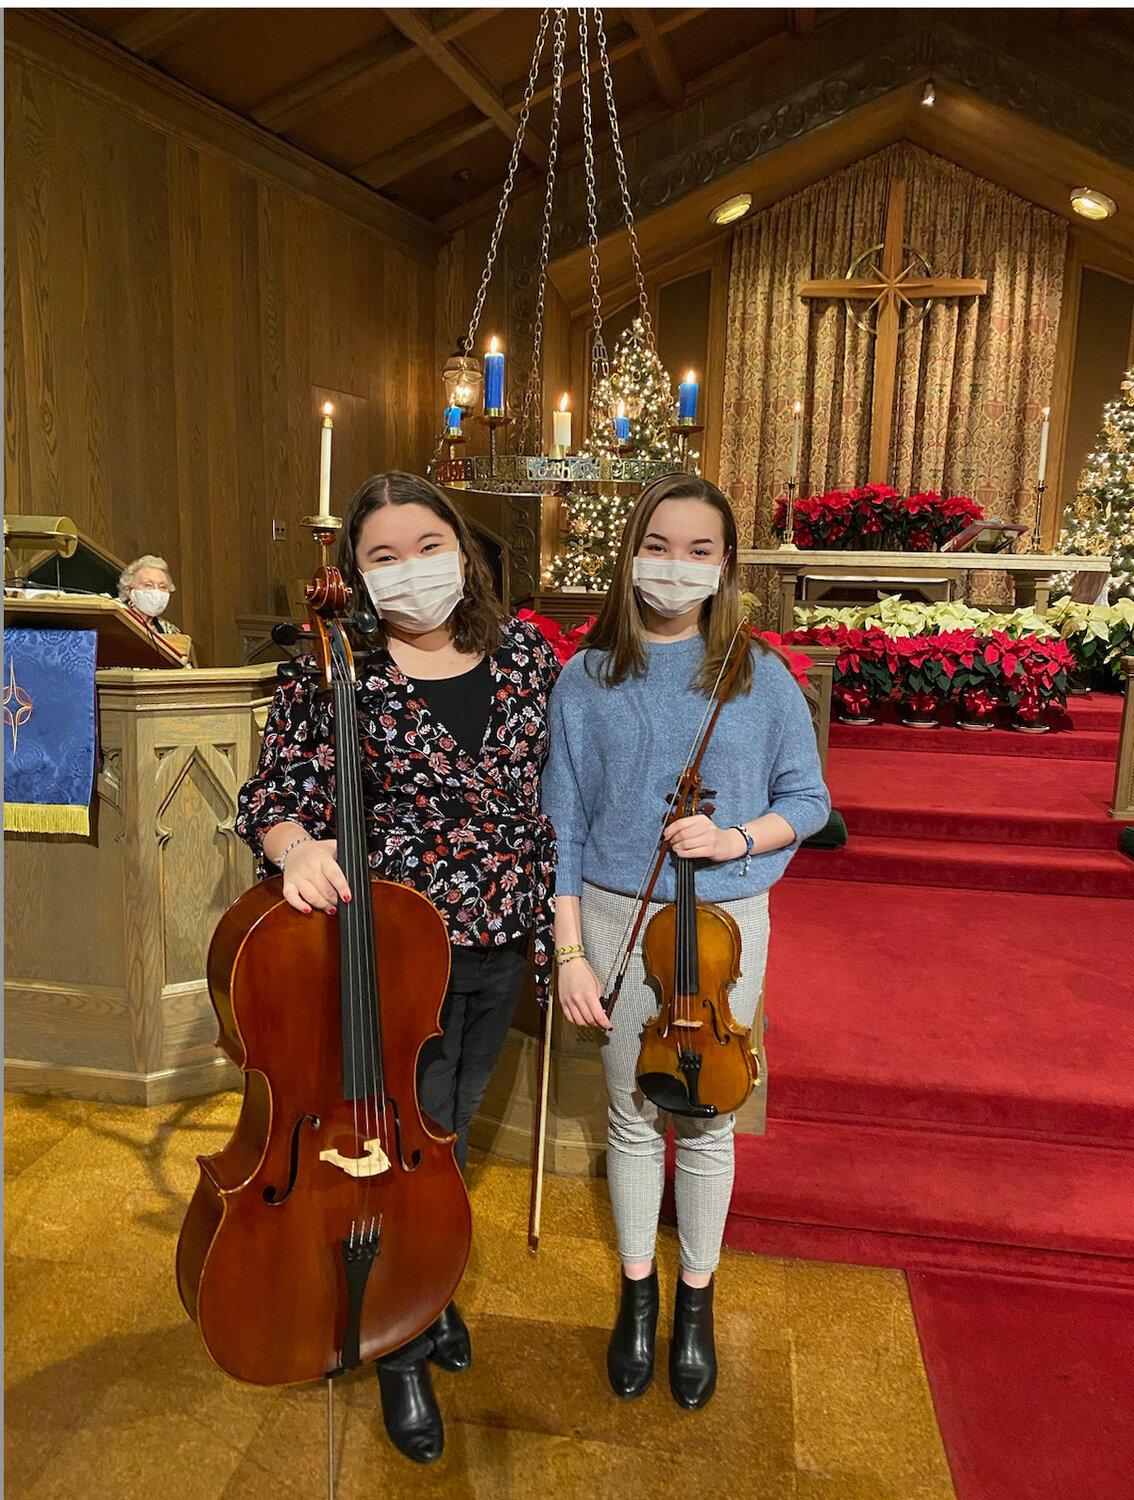 Kayla and Emma Sorensen performed Christmas songs for Our Saviour’s Lutheran Church. The musicians wore their masks inside to follow state-mandated social distancing guidelines.